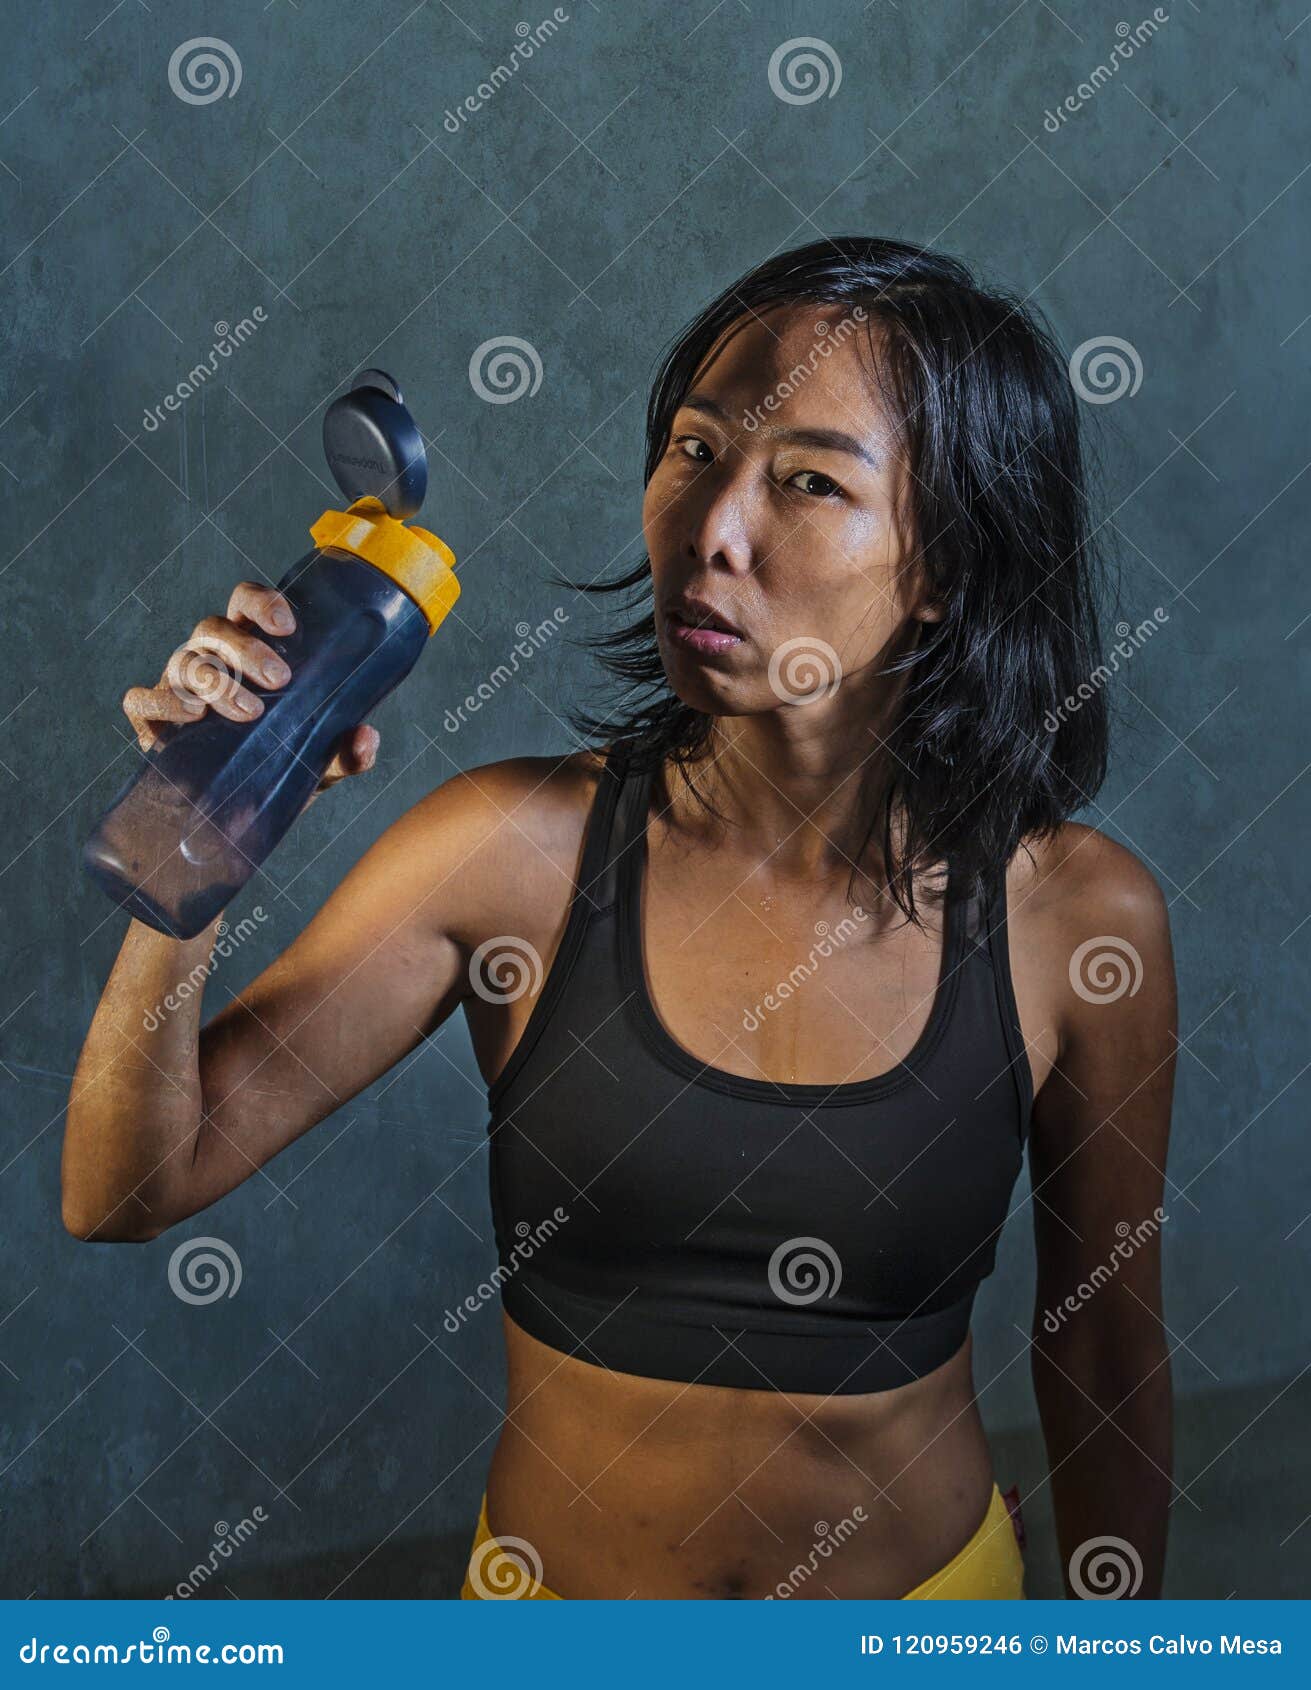 Portrait of Young Athletic and Fit Asian Korean Woman in Fitness Top  Holding Drinking Water Bottle Posing Cool in Bad Girl Defiant Stock Photo -  Image of advertising, combat: 120959246